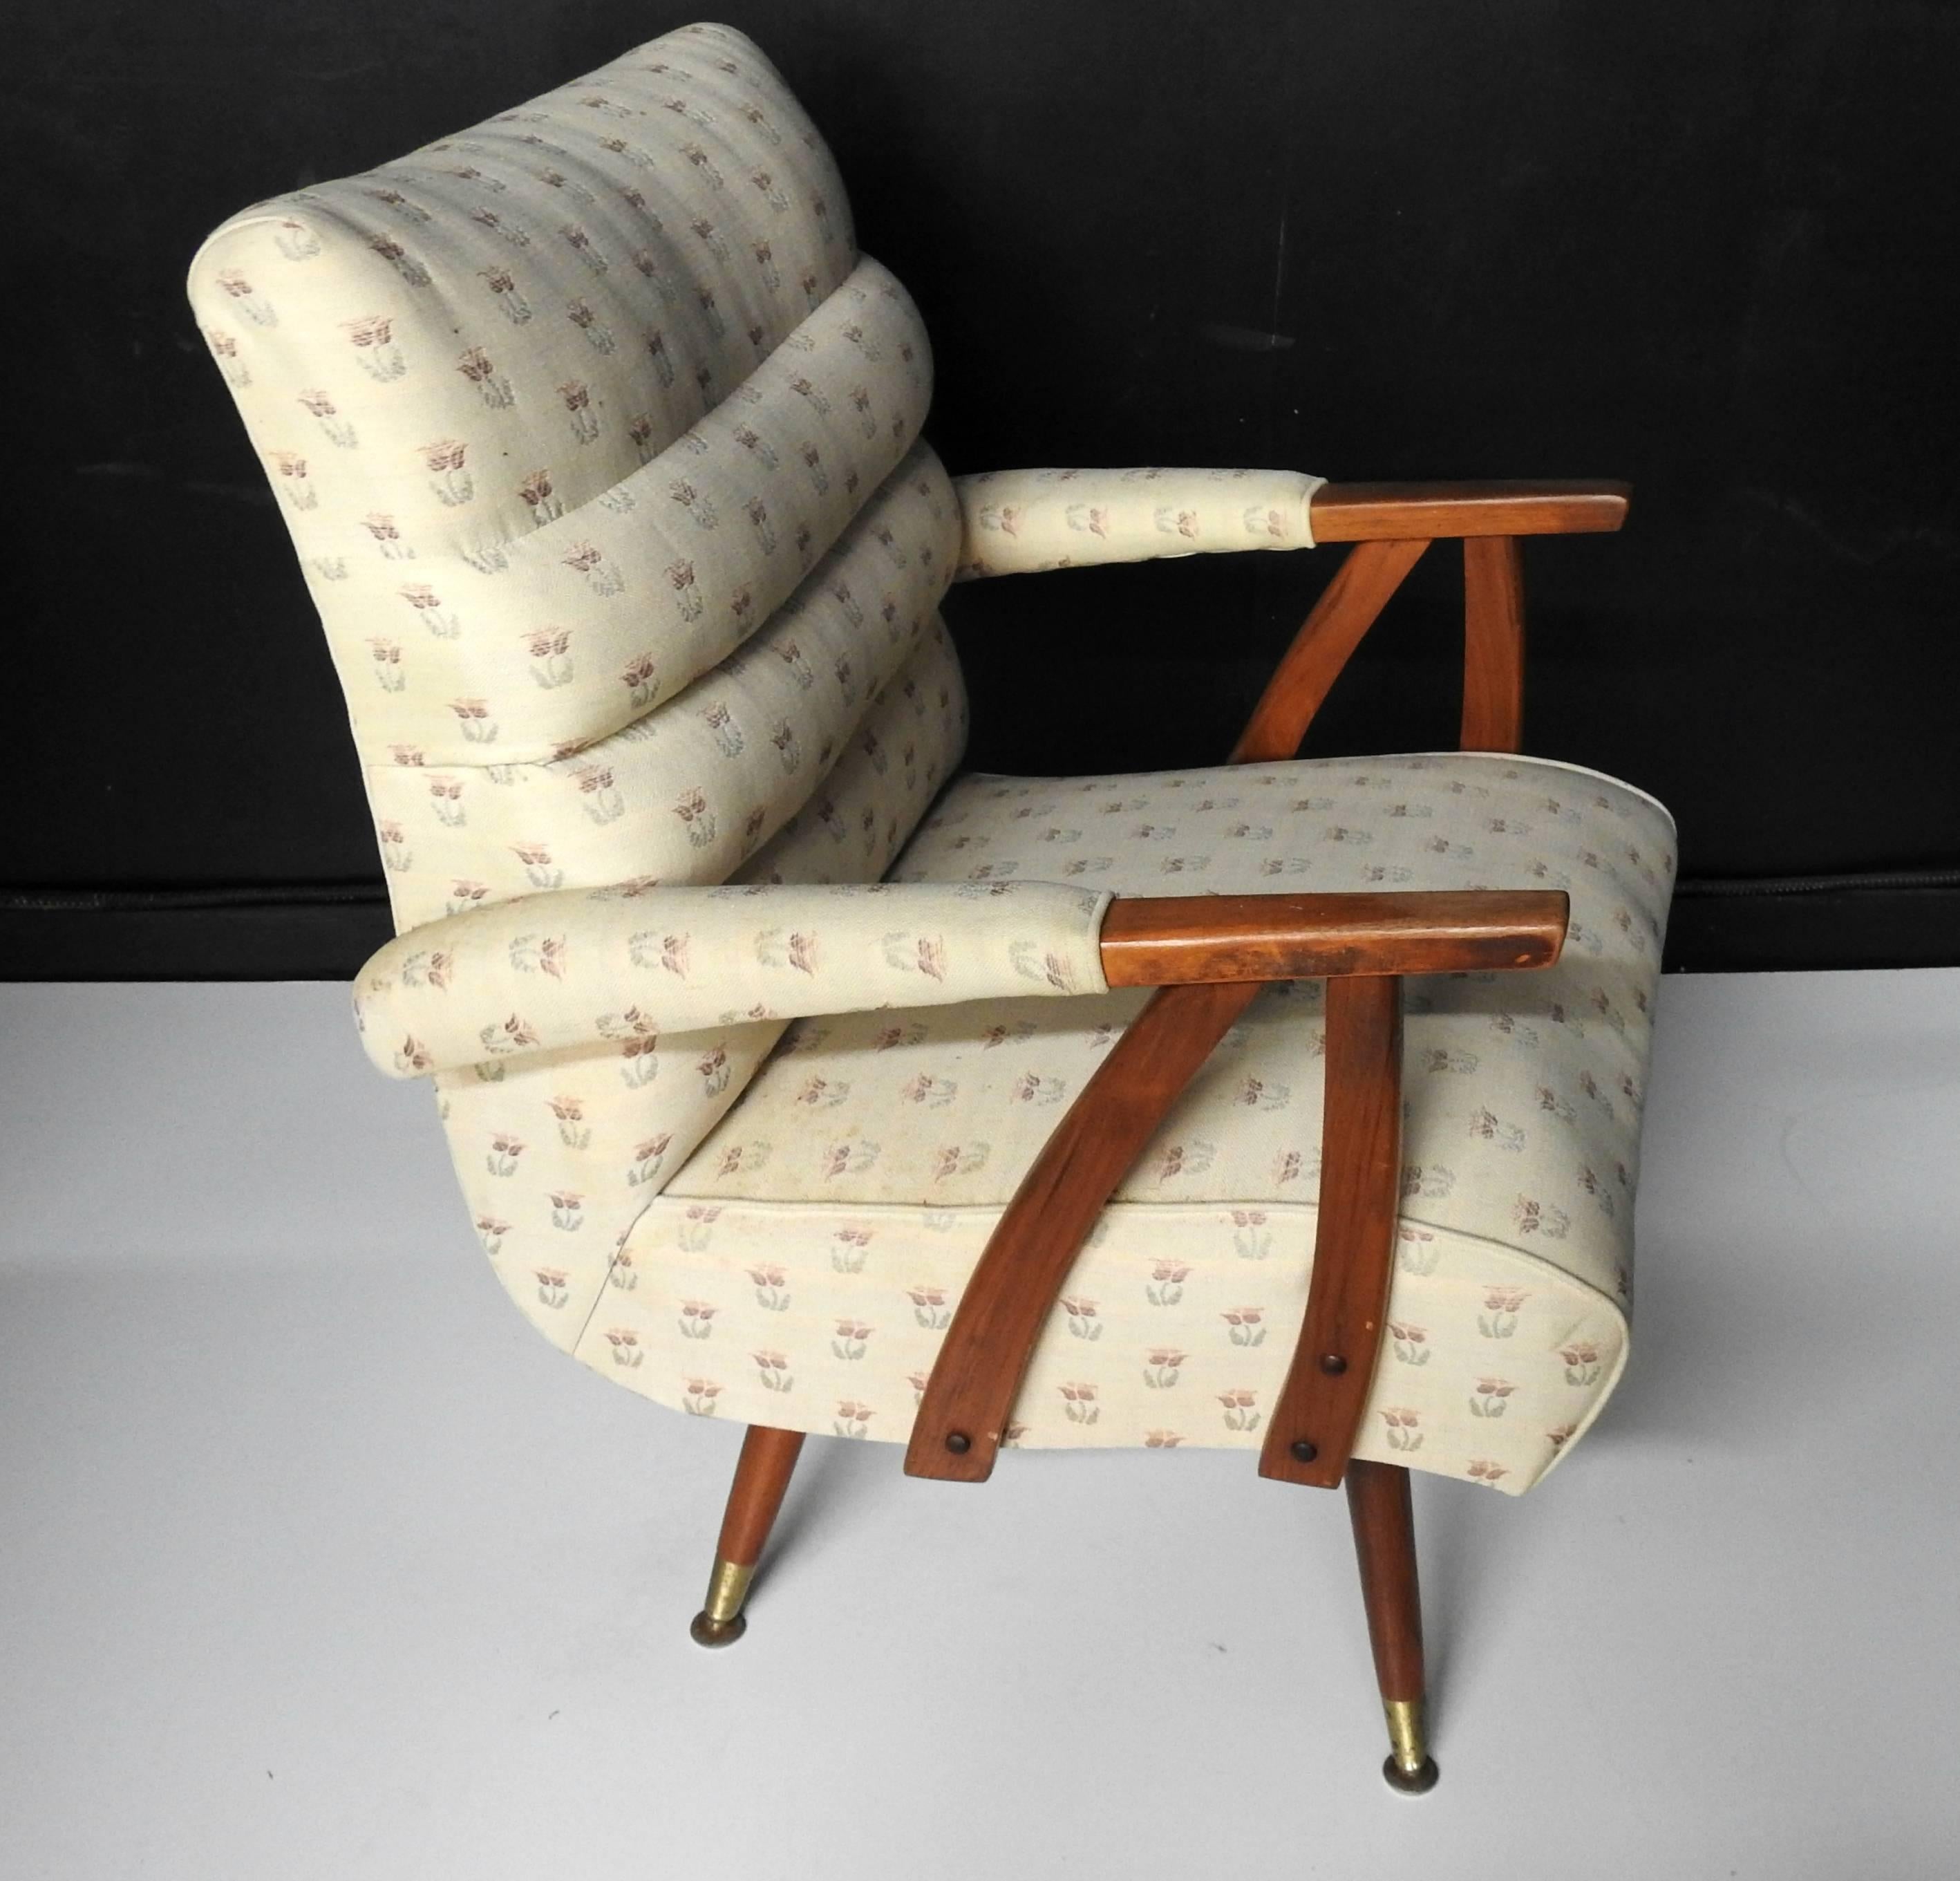 Pair of Italian style rocking easy chairs with brass sabots by Schlager upholstery.